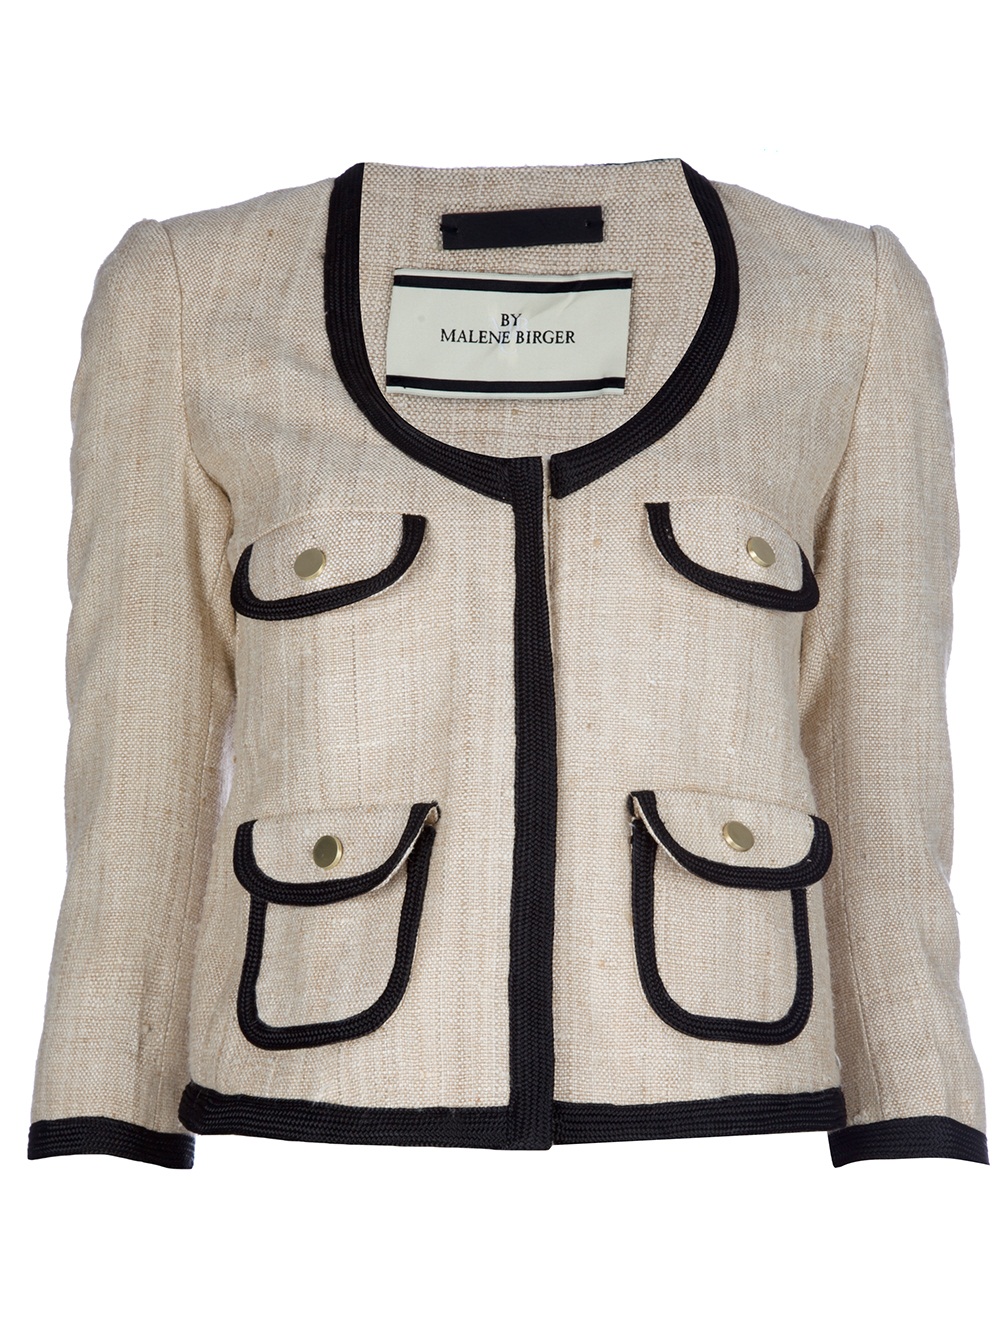 By Malene Birger Mehra Jacket in Sand (Natural) - Lyst